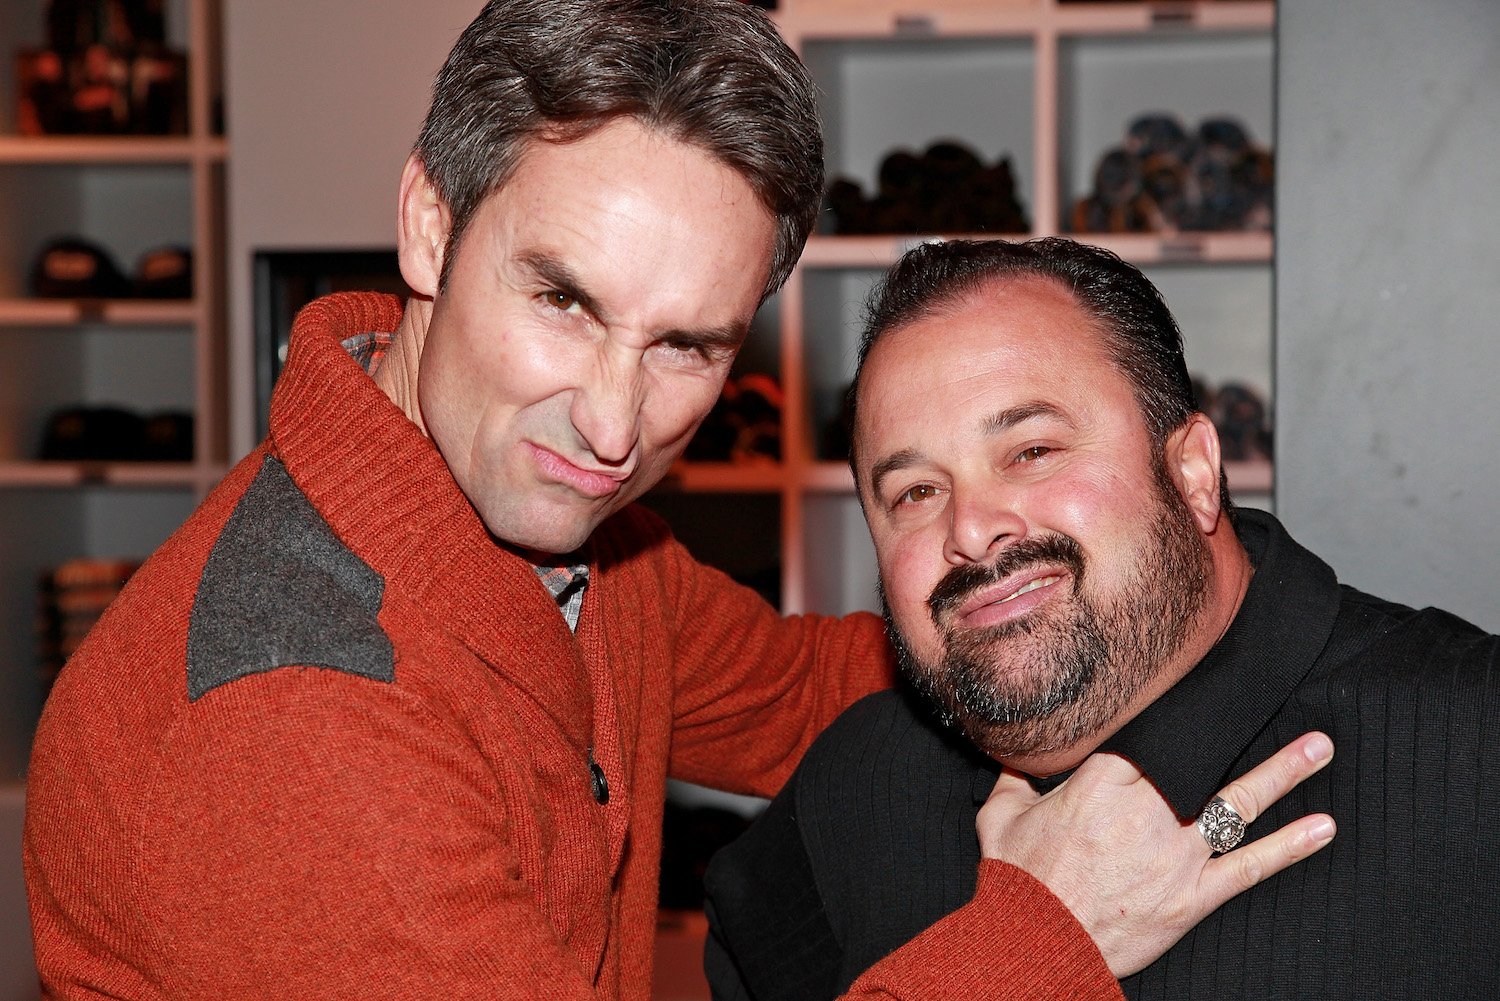 Mike Wolfe and Frank Fritz playfully smiling together from 'American Pickers'